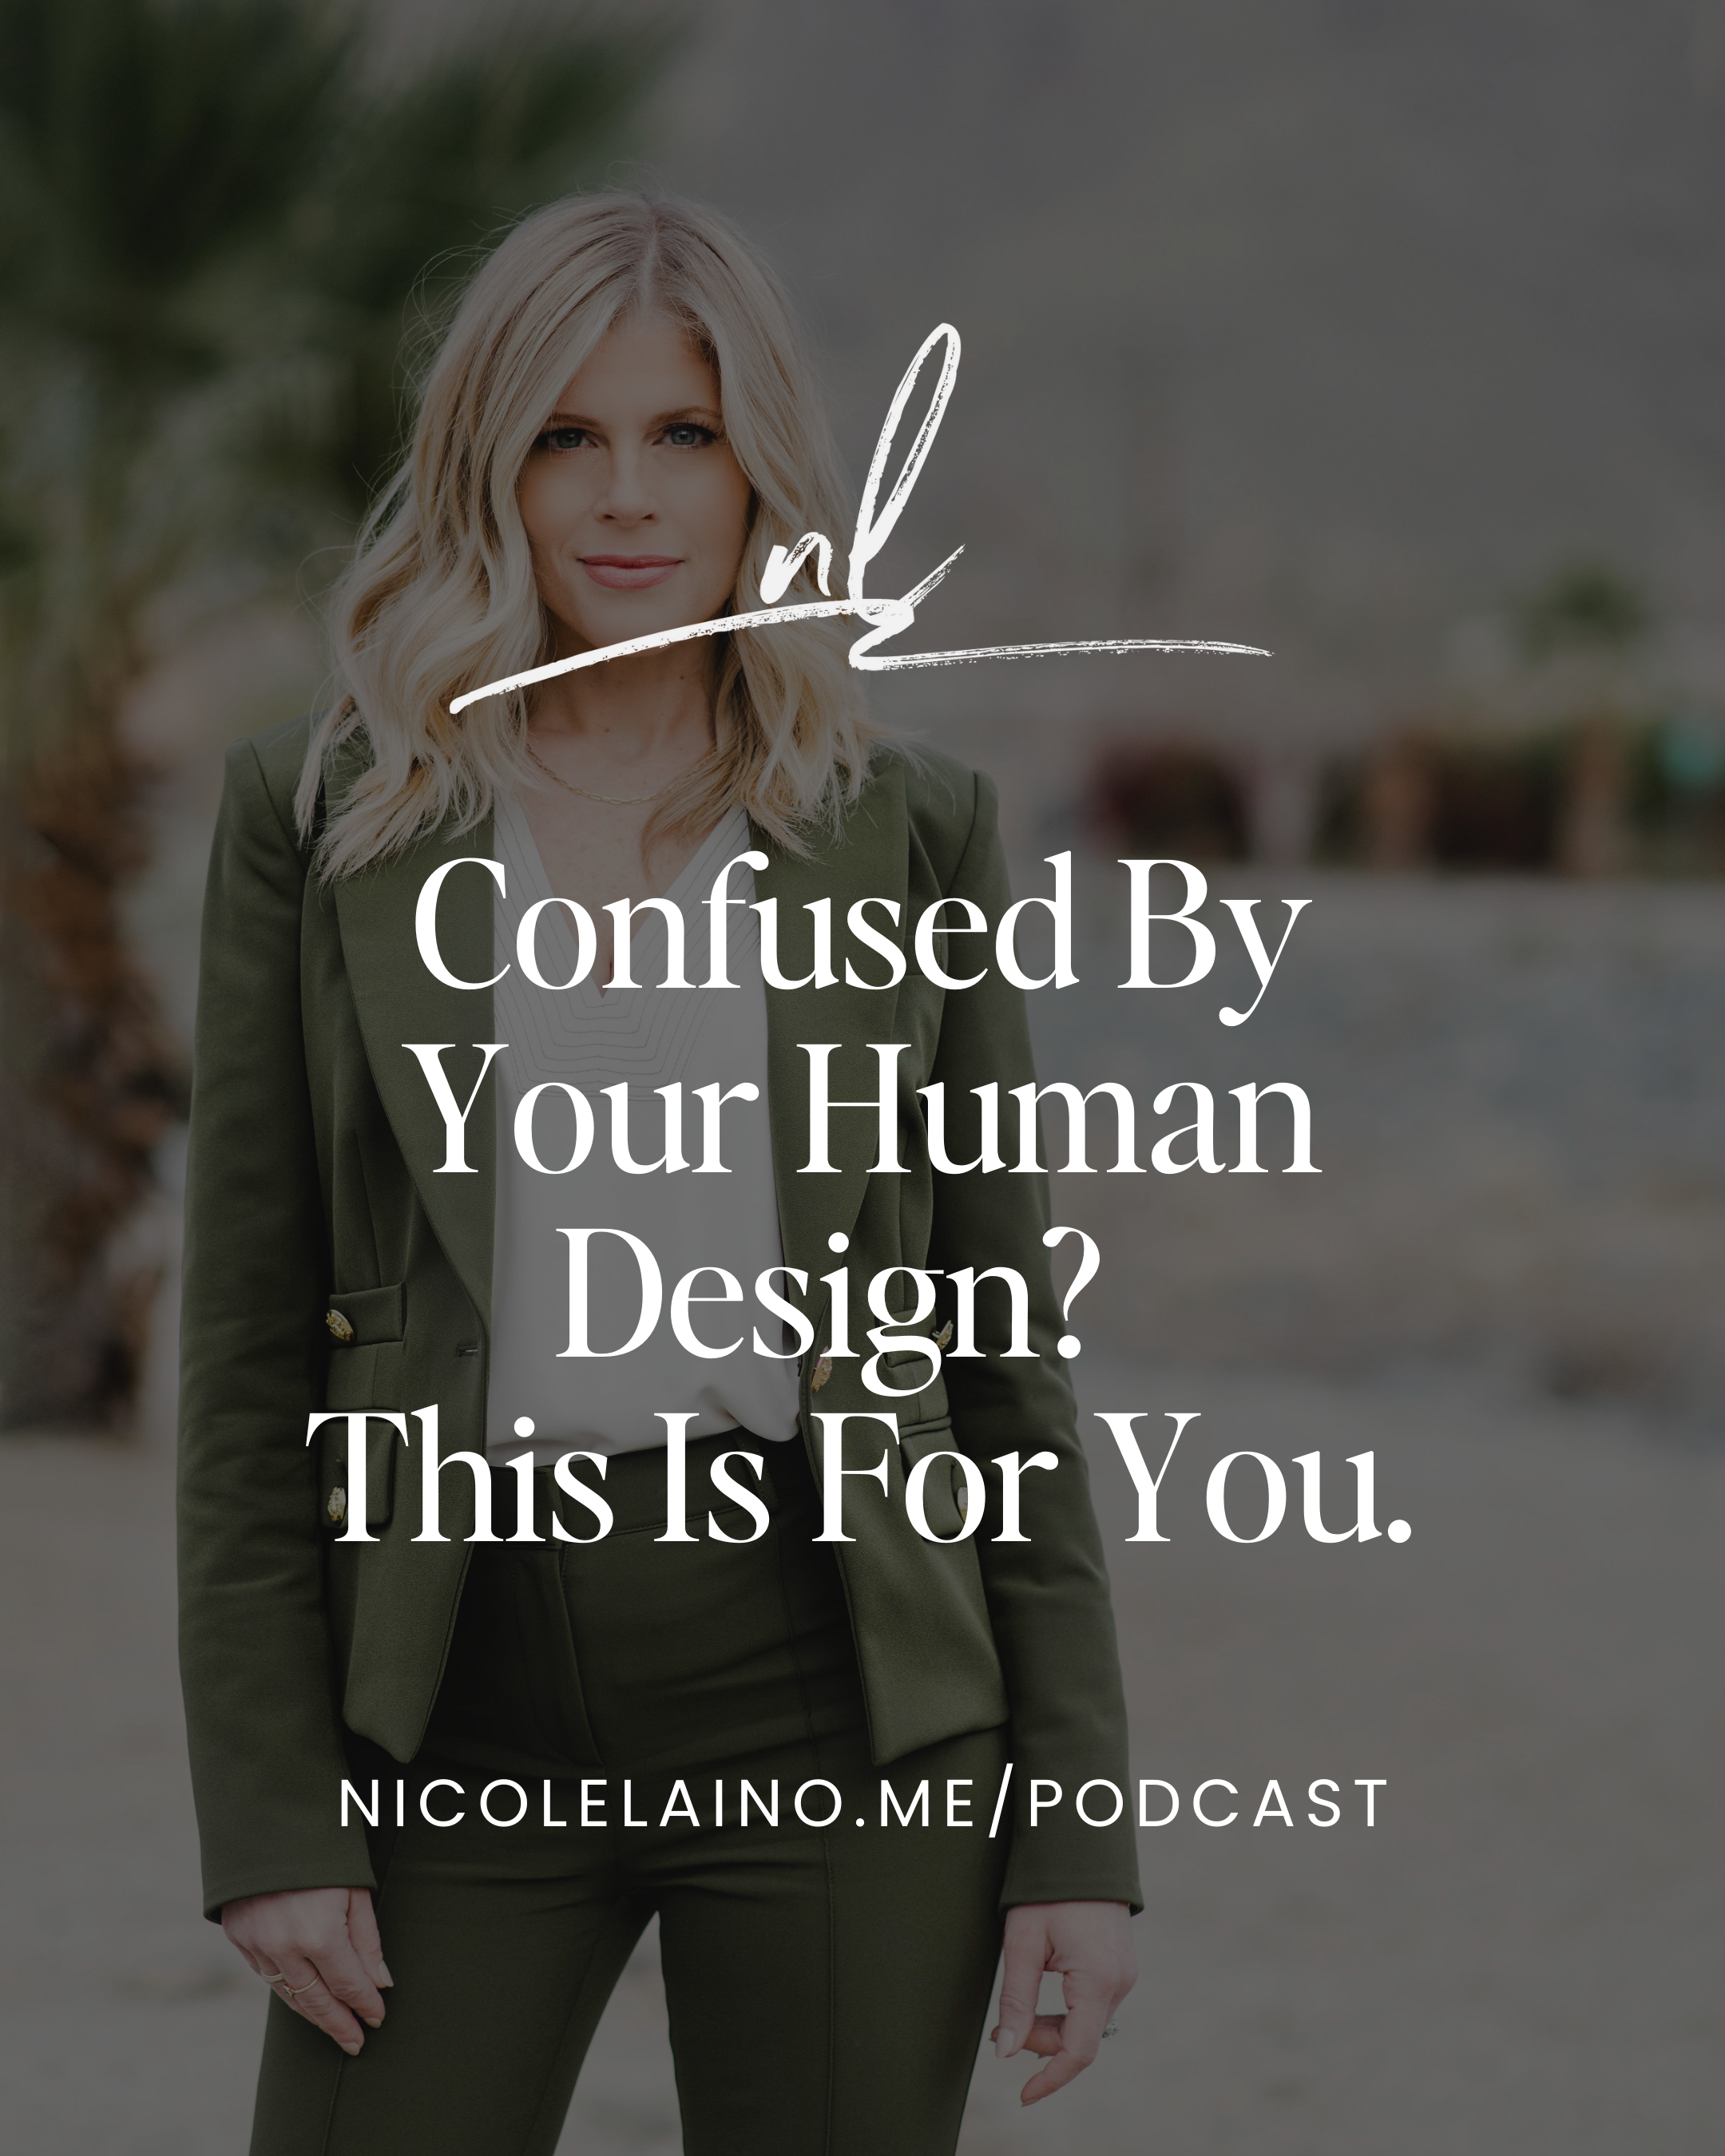 Confused By Your Human Design? This Is For You.